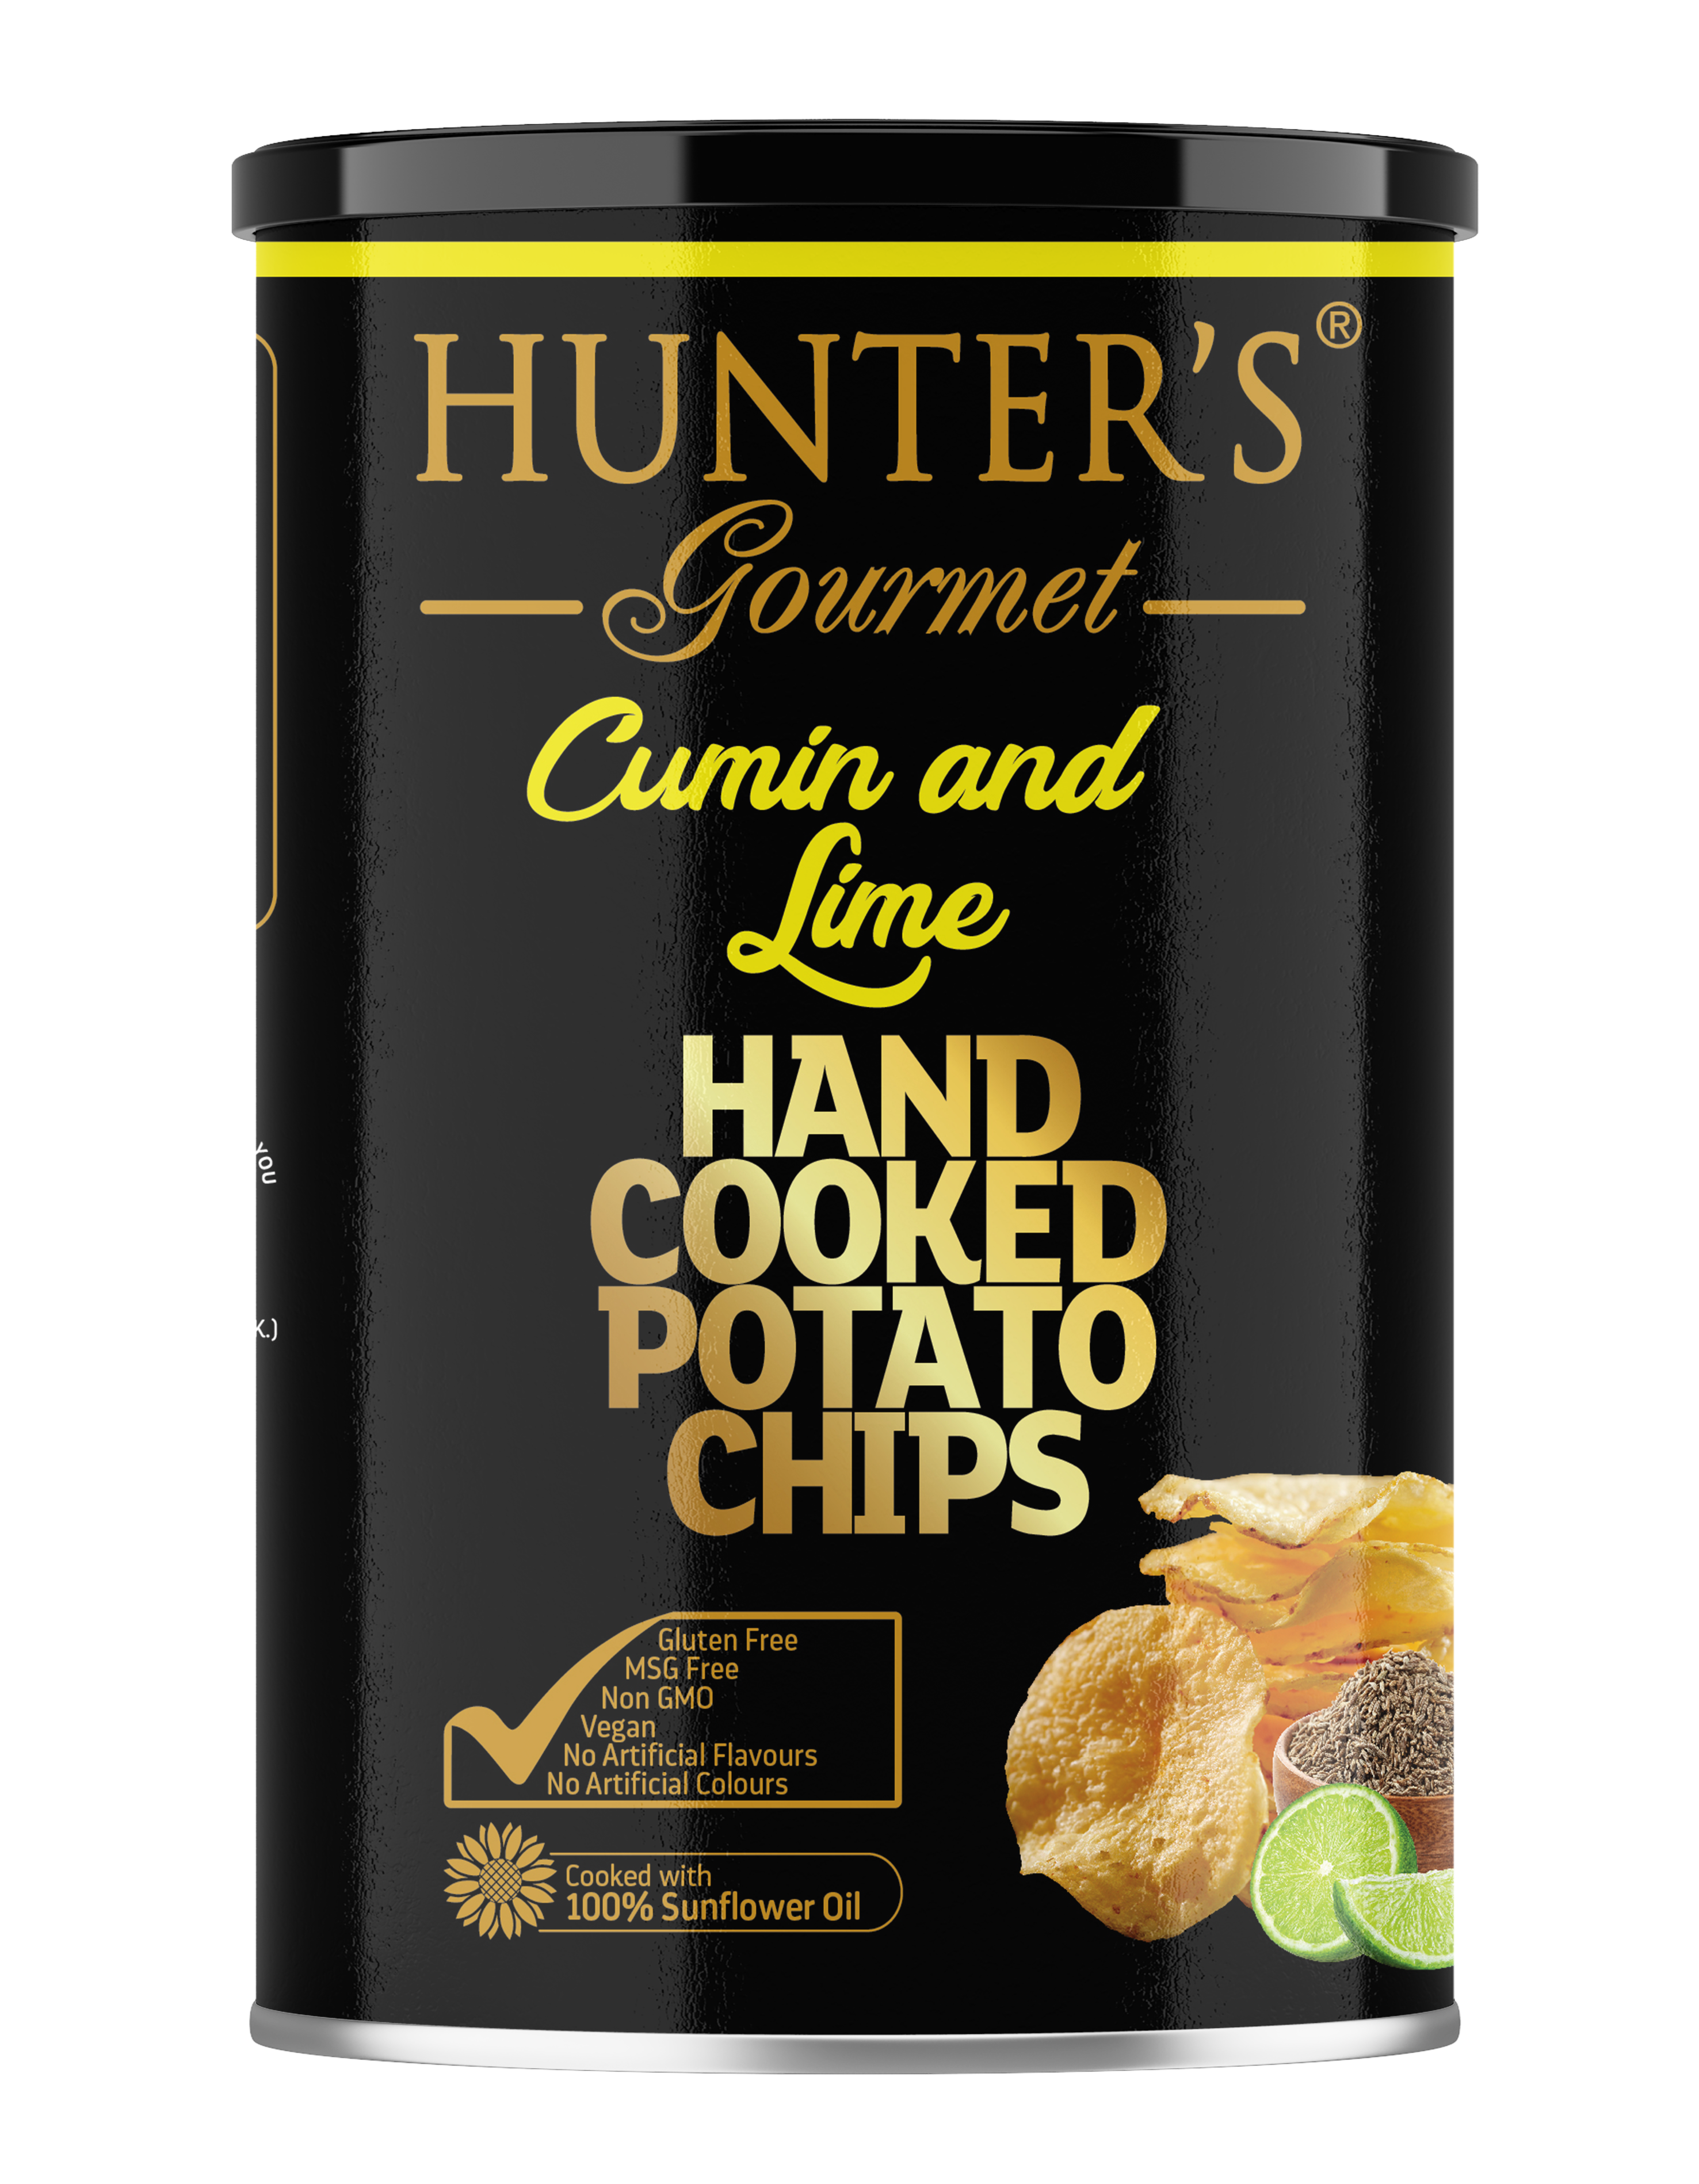 Hunter's Gourmet Hand Cooked Potato Chips Cumin and Lime 12 units per case 150 g